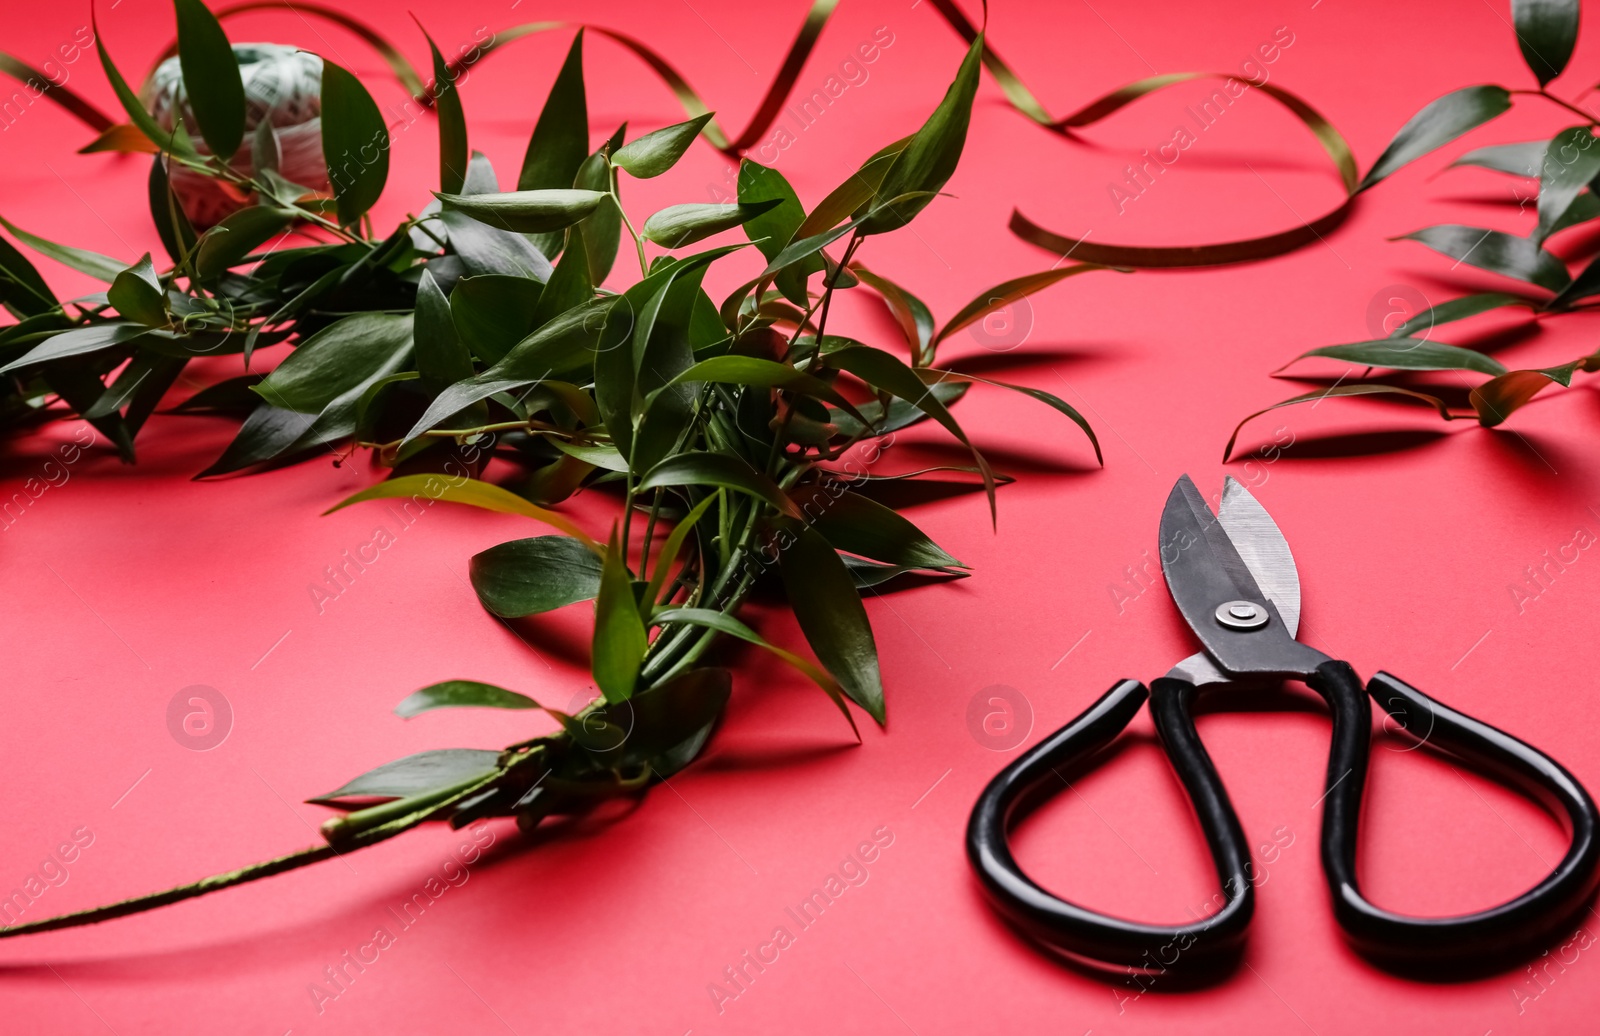 Photo of Unfinished mistletoe wreath and florist supplies on red background. Traditional Christmas decor